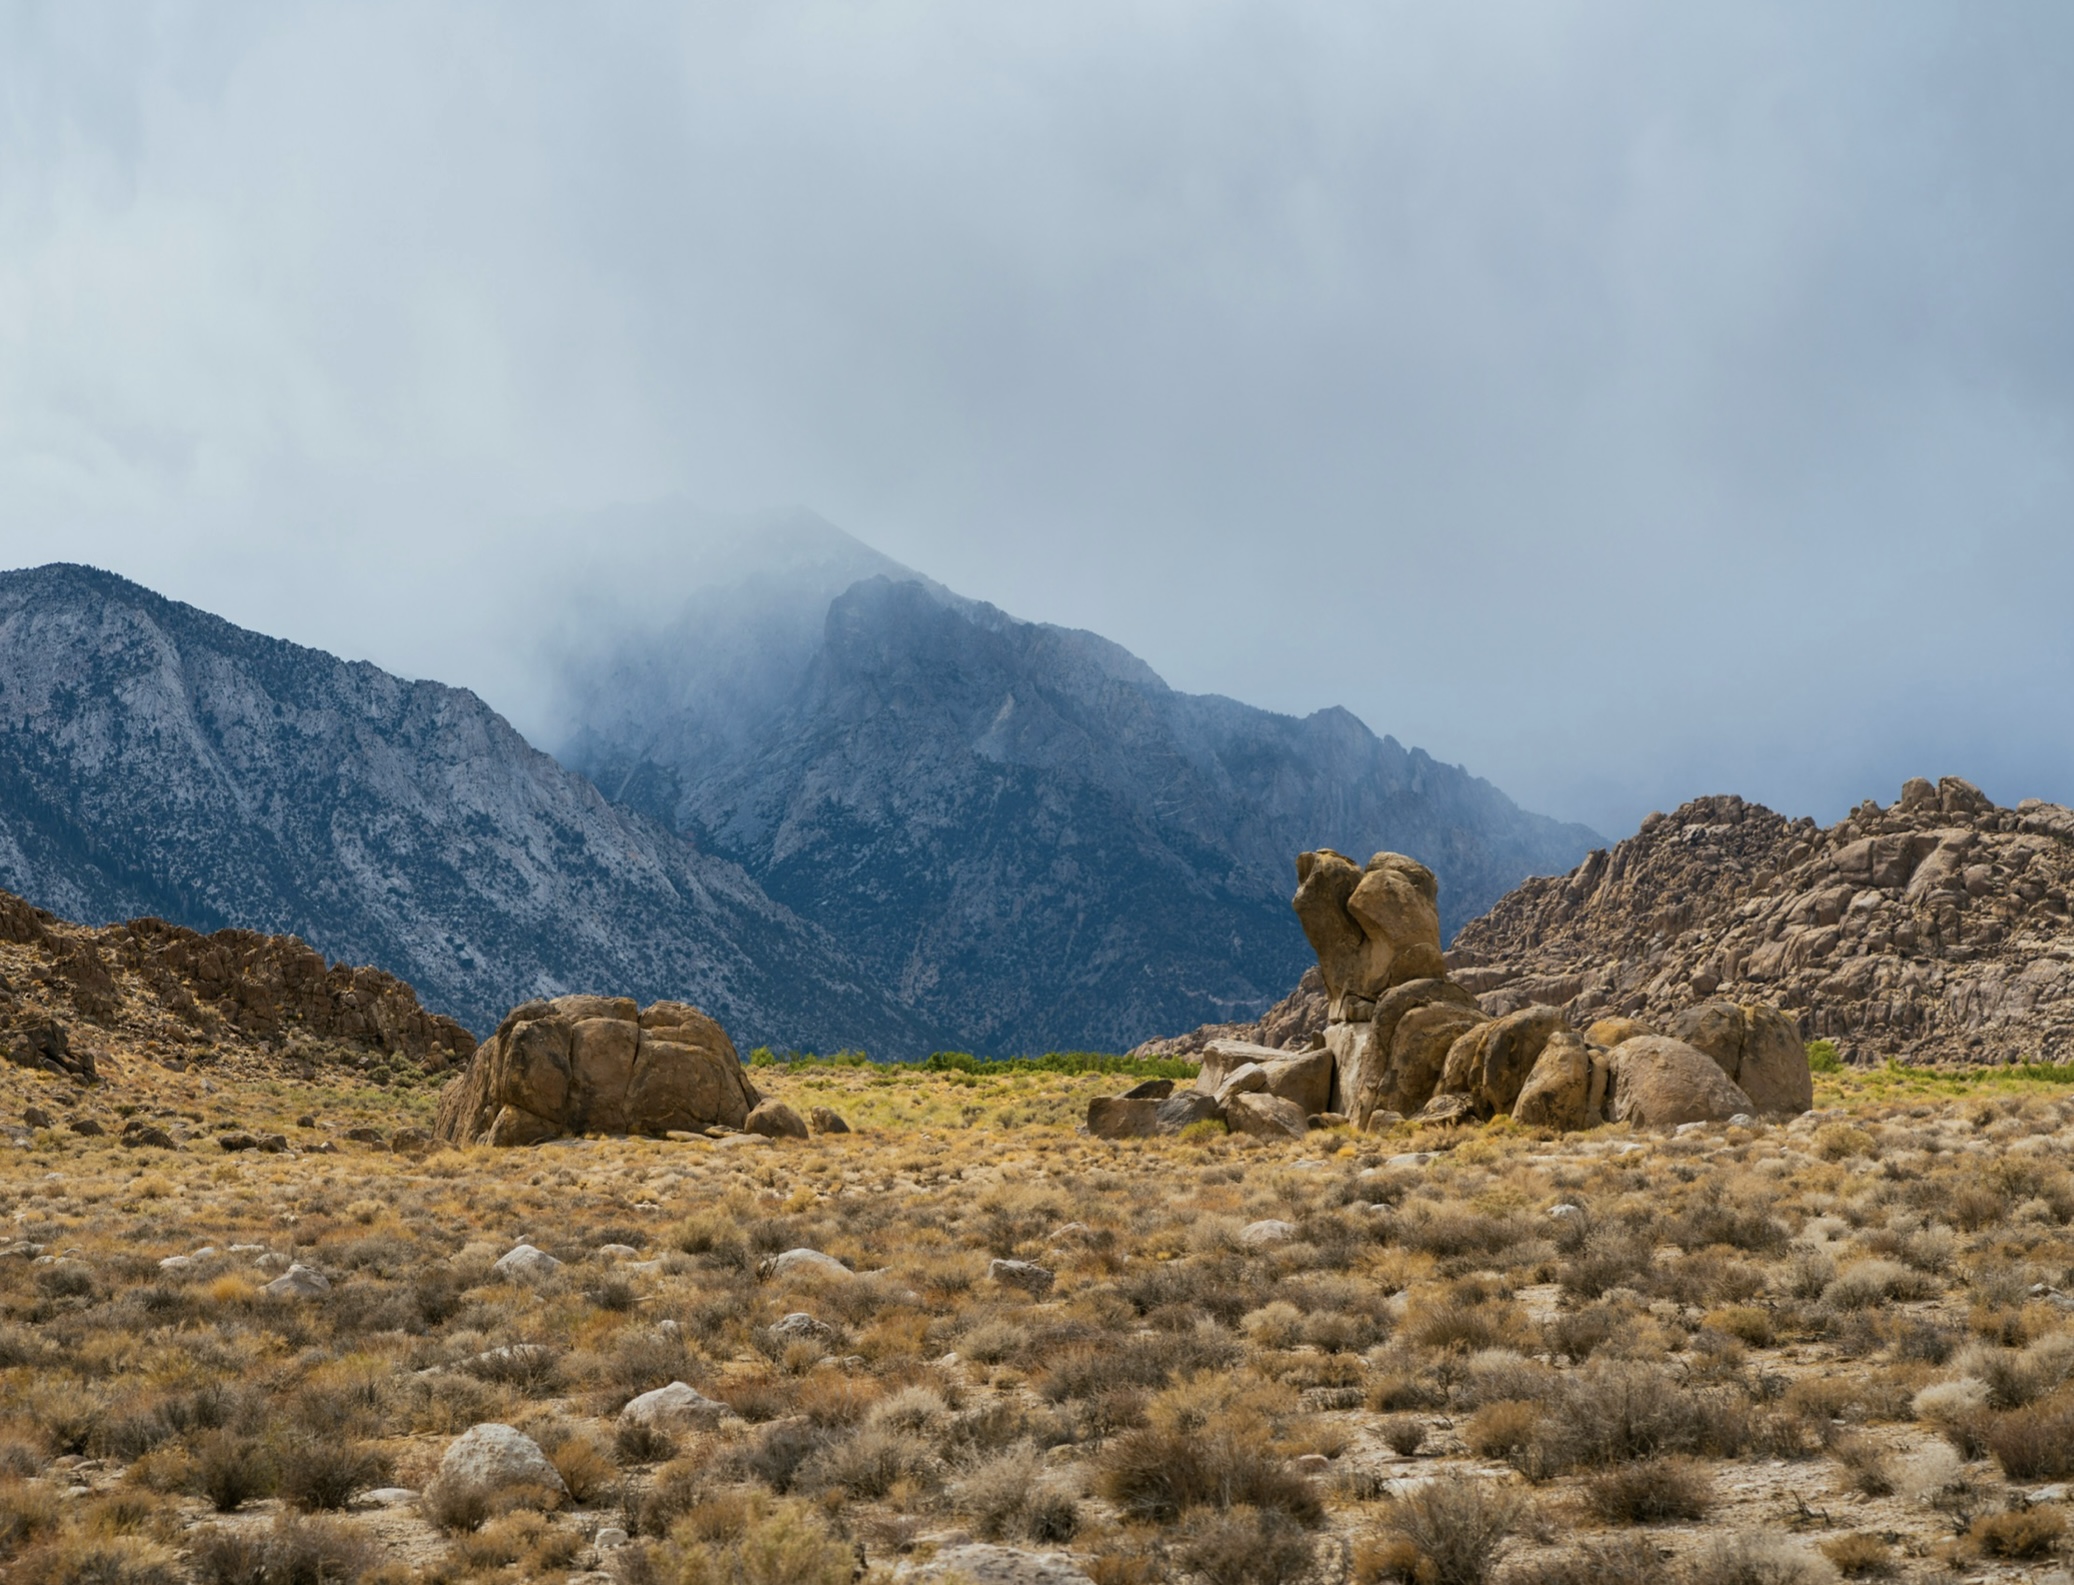 The Sierra Nevada Mountains in California are a film location for the movie “High Plains Drifter”.
Pictured: the grand mountains of Sierra Nevada with s light fog in the air